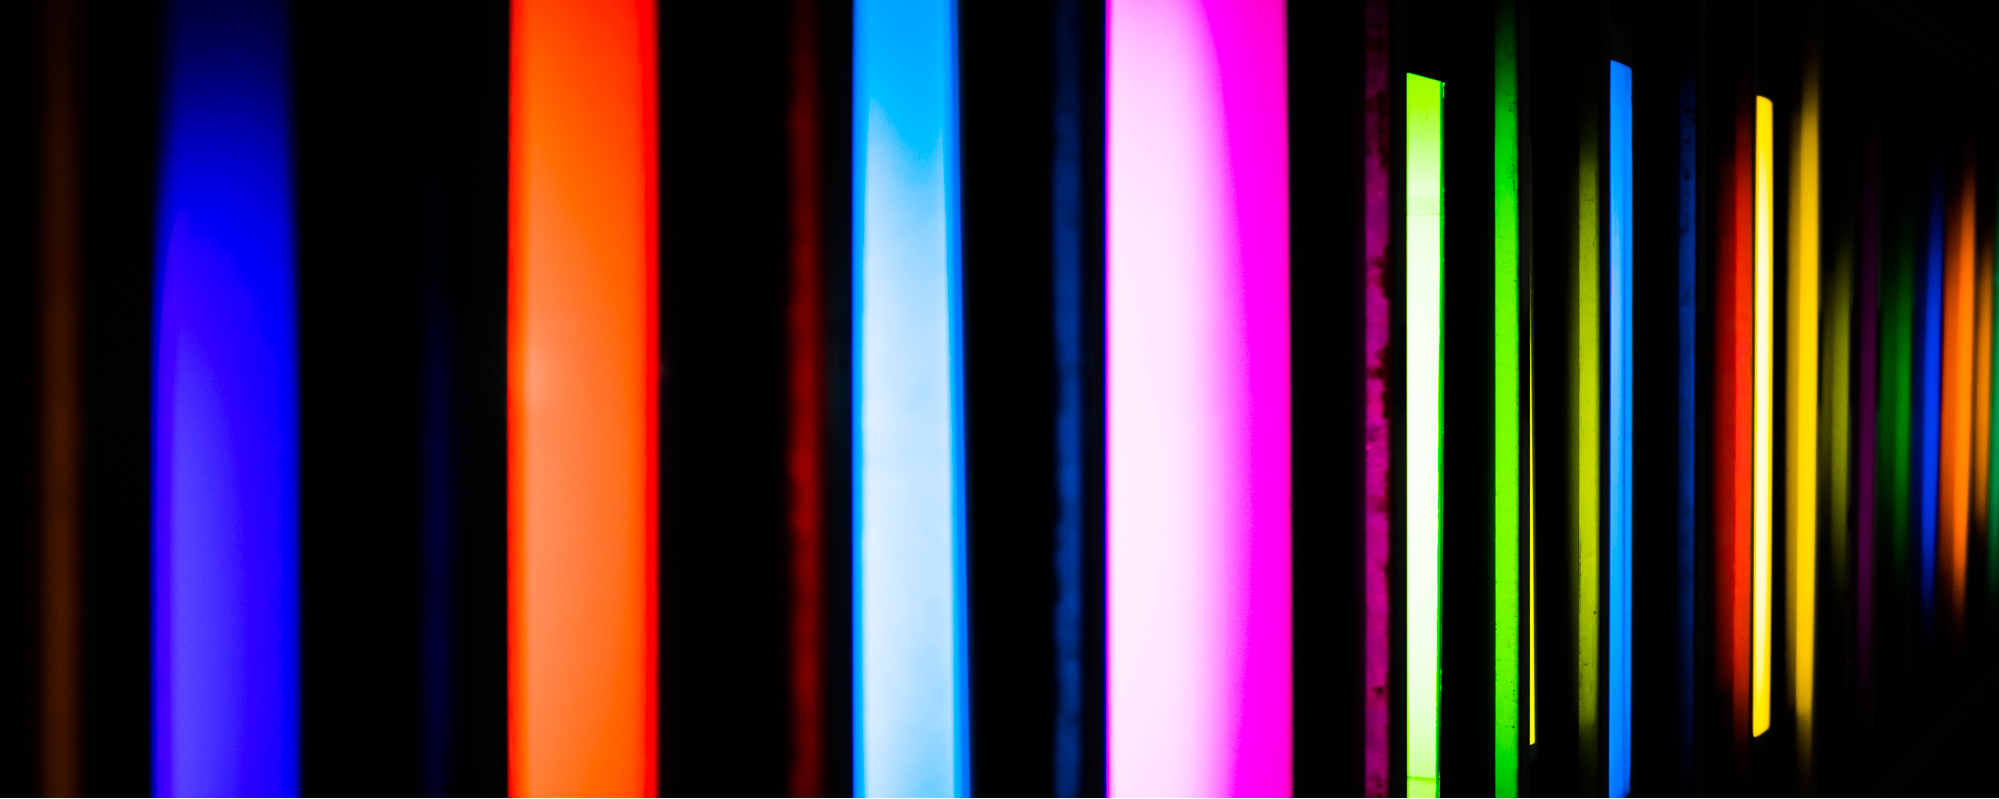 Abstract Lighting from the Tate Modern in 2018